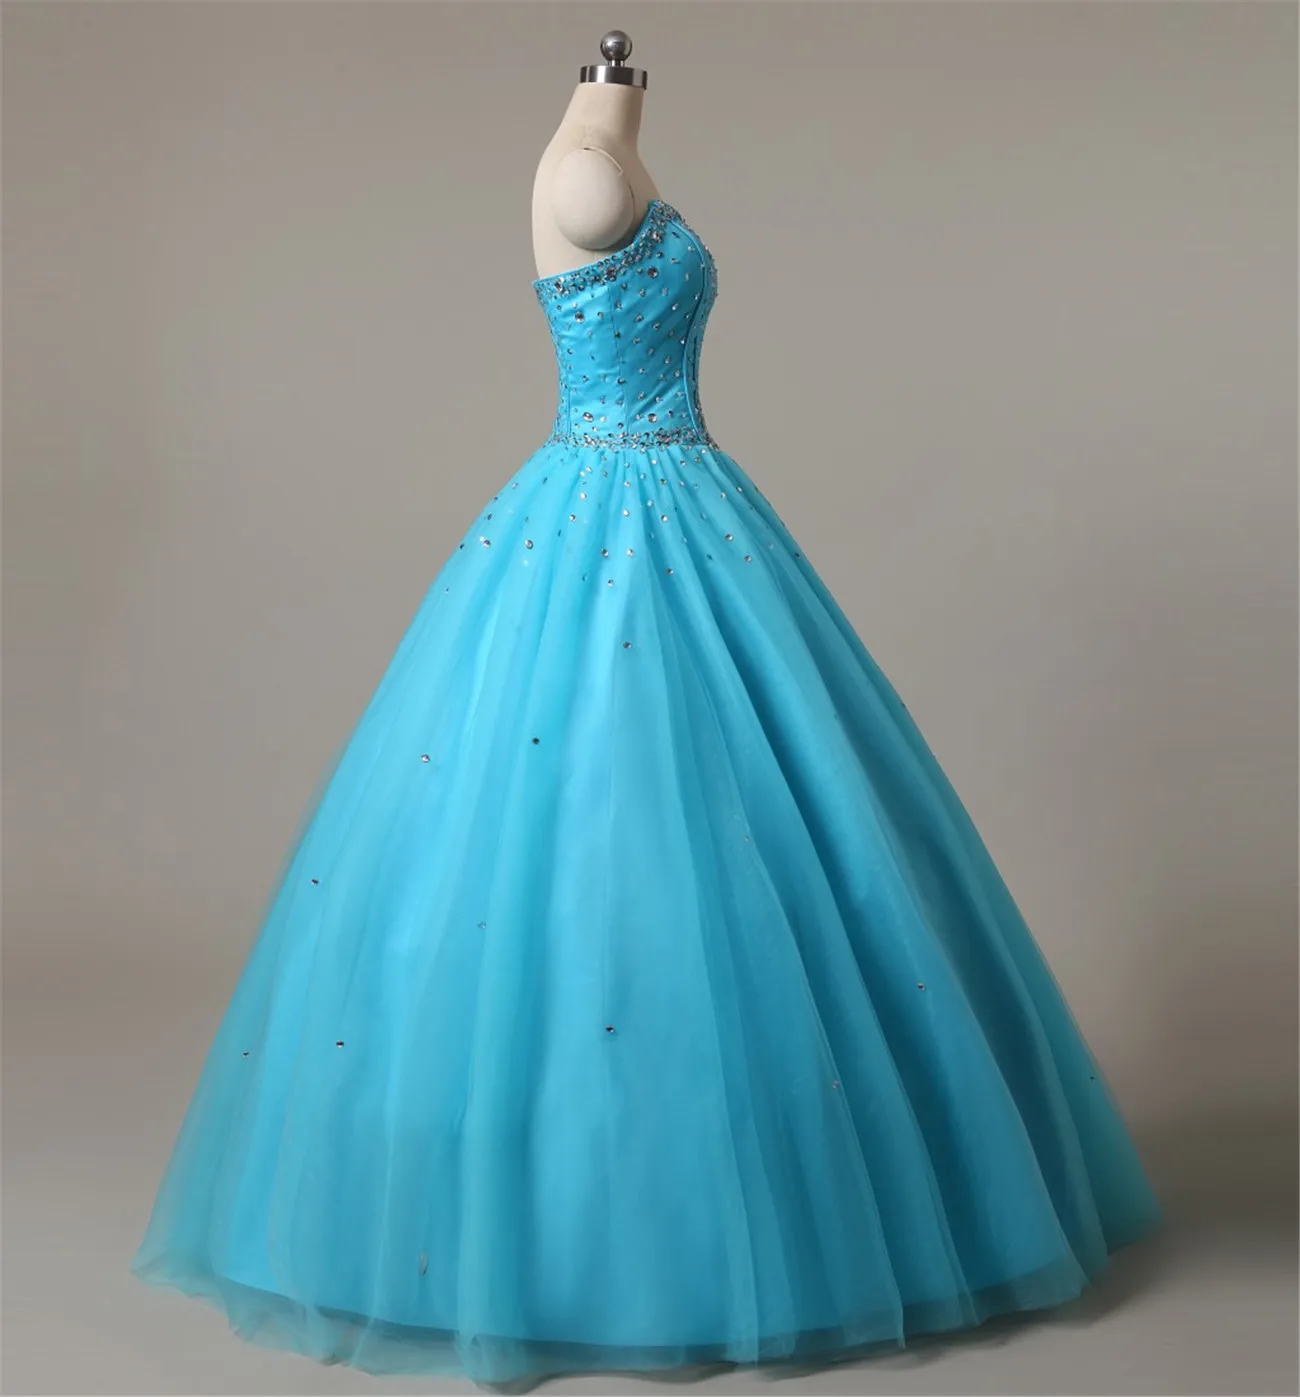 Turquoise Quinceanera Dresses 2017 Tulle Crystal Beads Masquerad Sweet ...